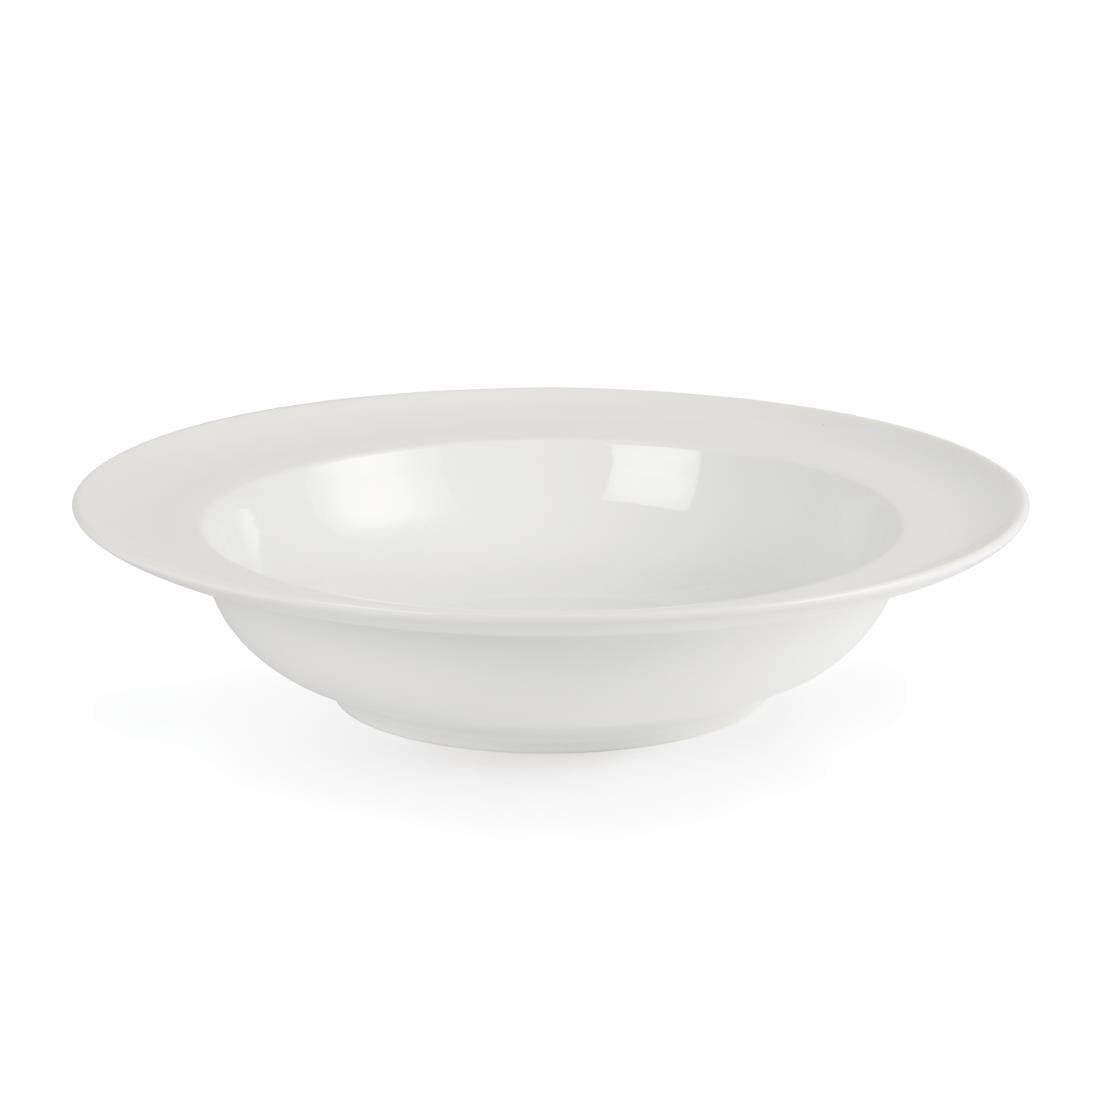 Olympia Whiteware Wide Rim Bowls 228mm 710ml 25oz (Pack of 4) - CB694  - 2